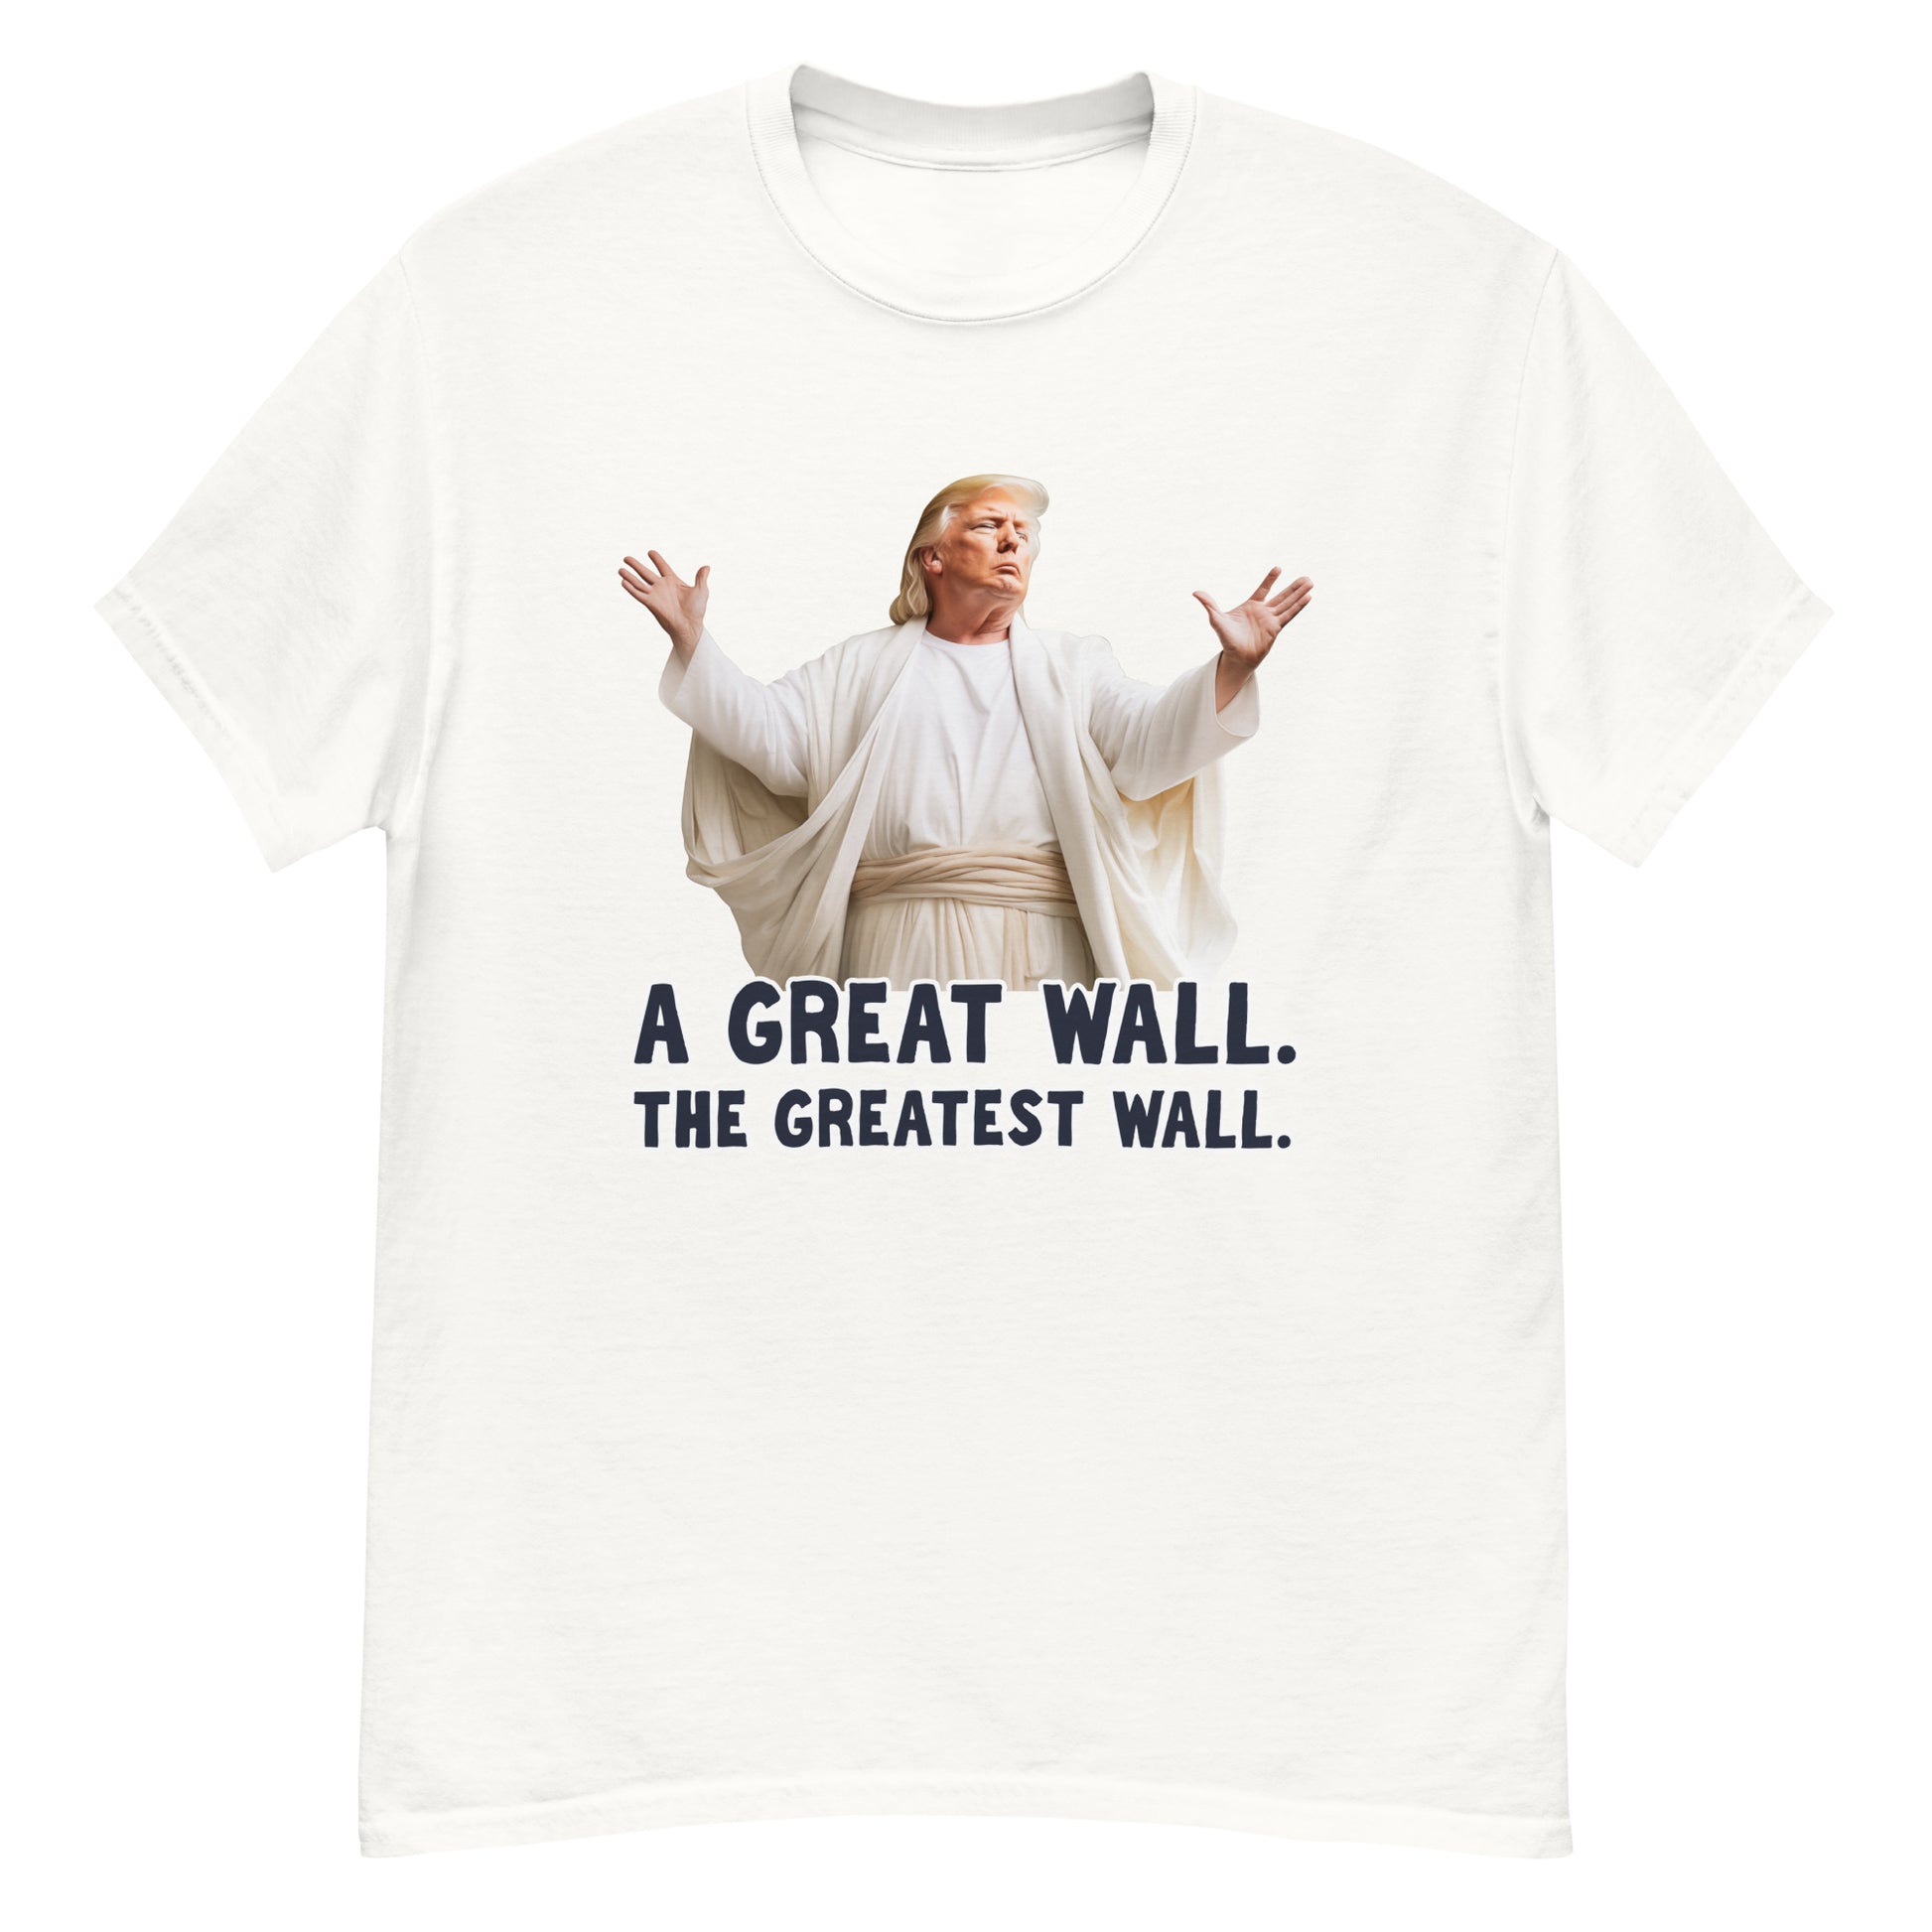 A shirt with donald trump in jesus robes and text that reads a great wall, the greatest wall